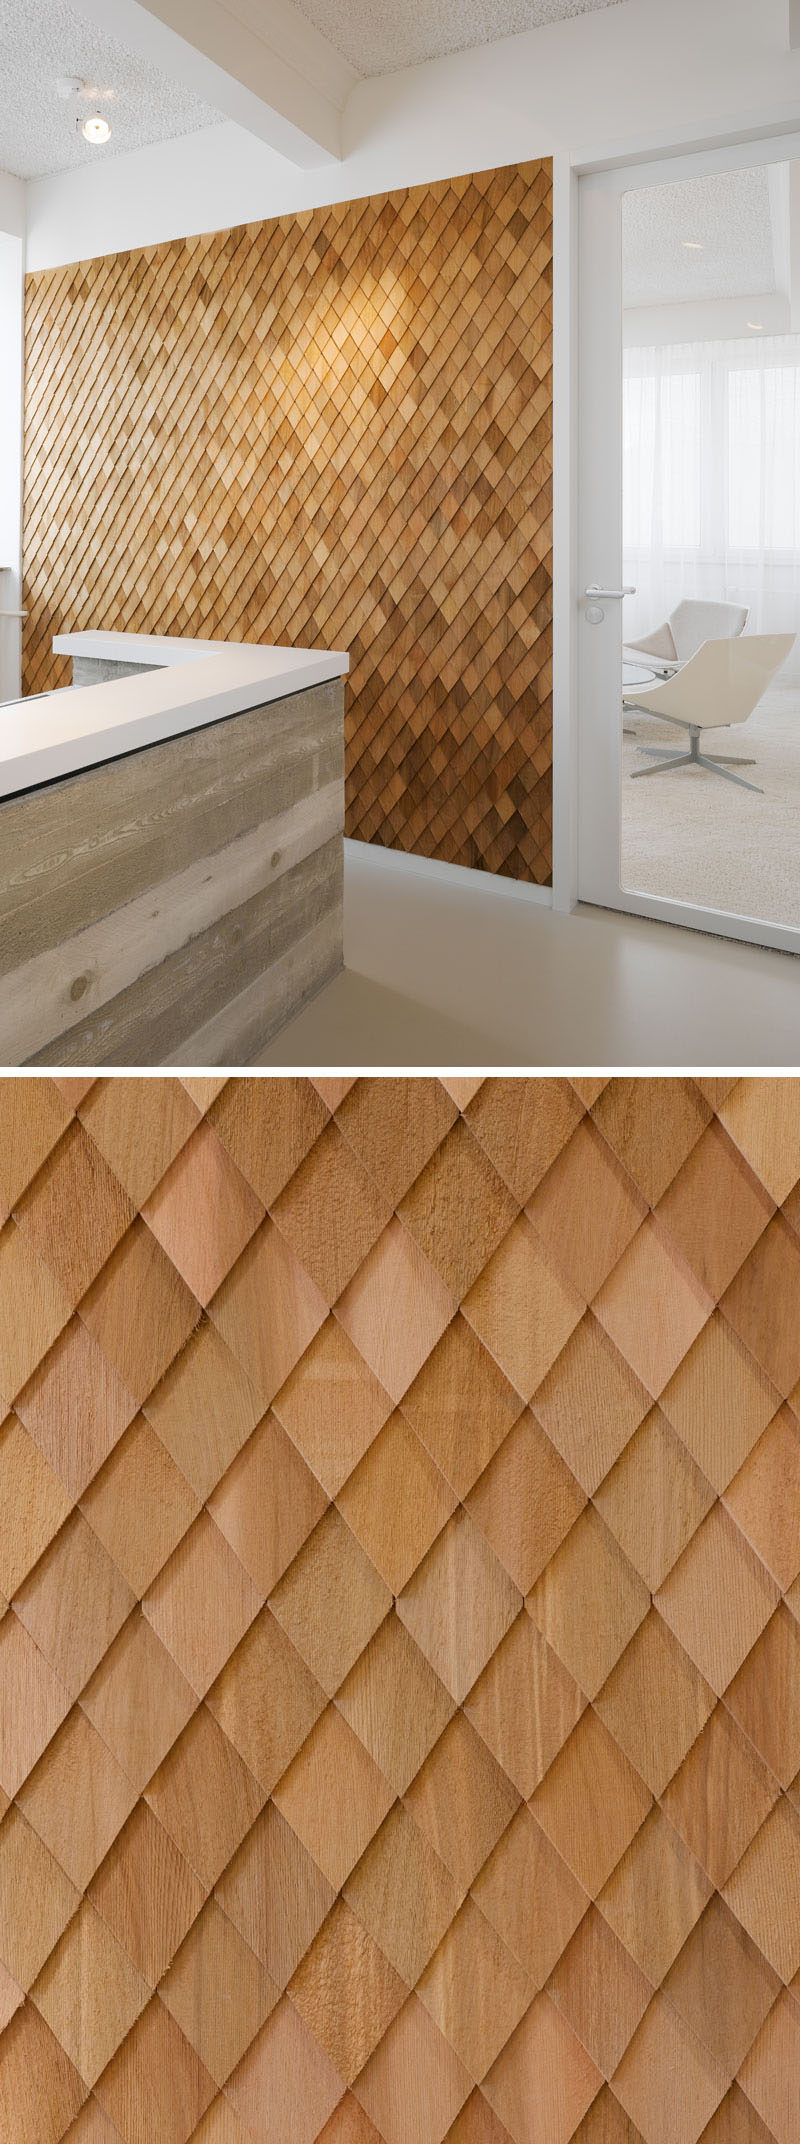 Interior Design Idea - In this contemporary office interior, the designers used wooden shingles on various wall panels to act as accent walls and to help create texture in the space.